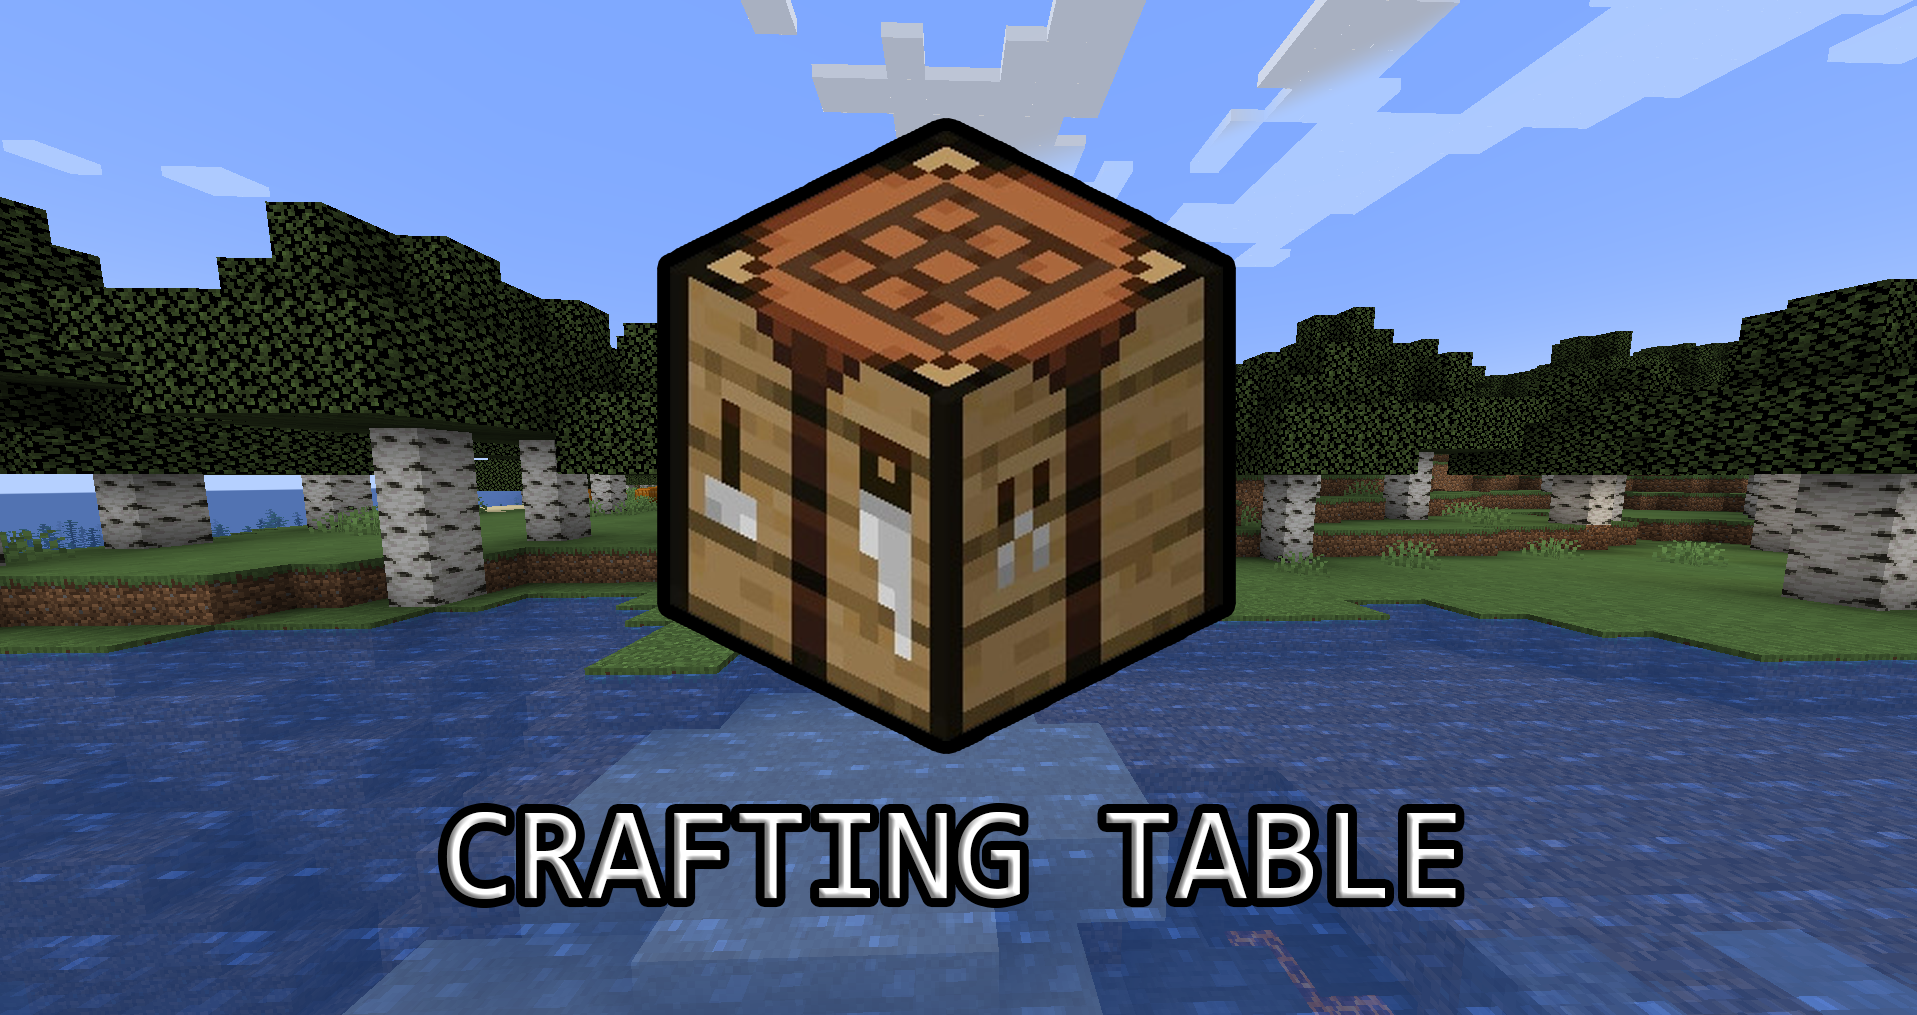 How To Use A Crafting Table in Minecraft